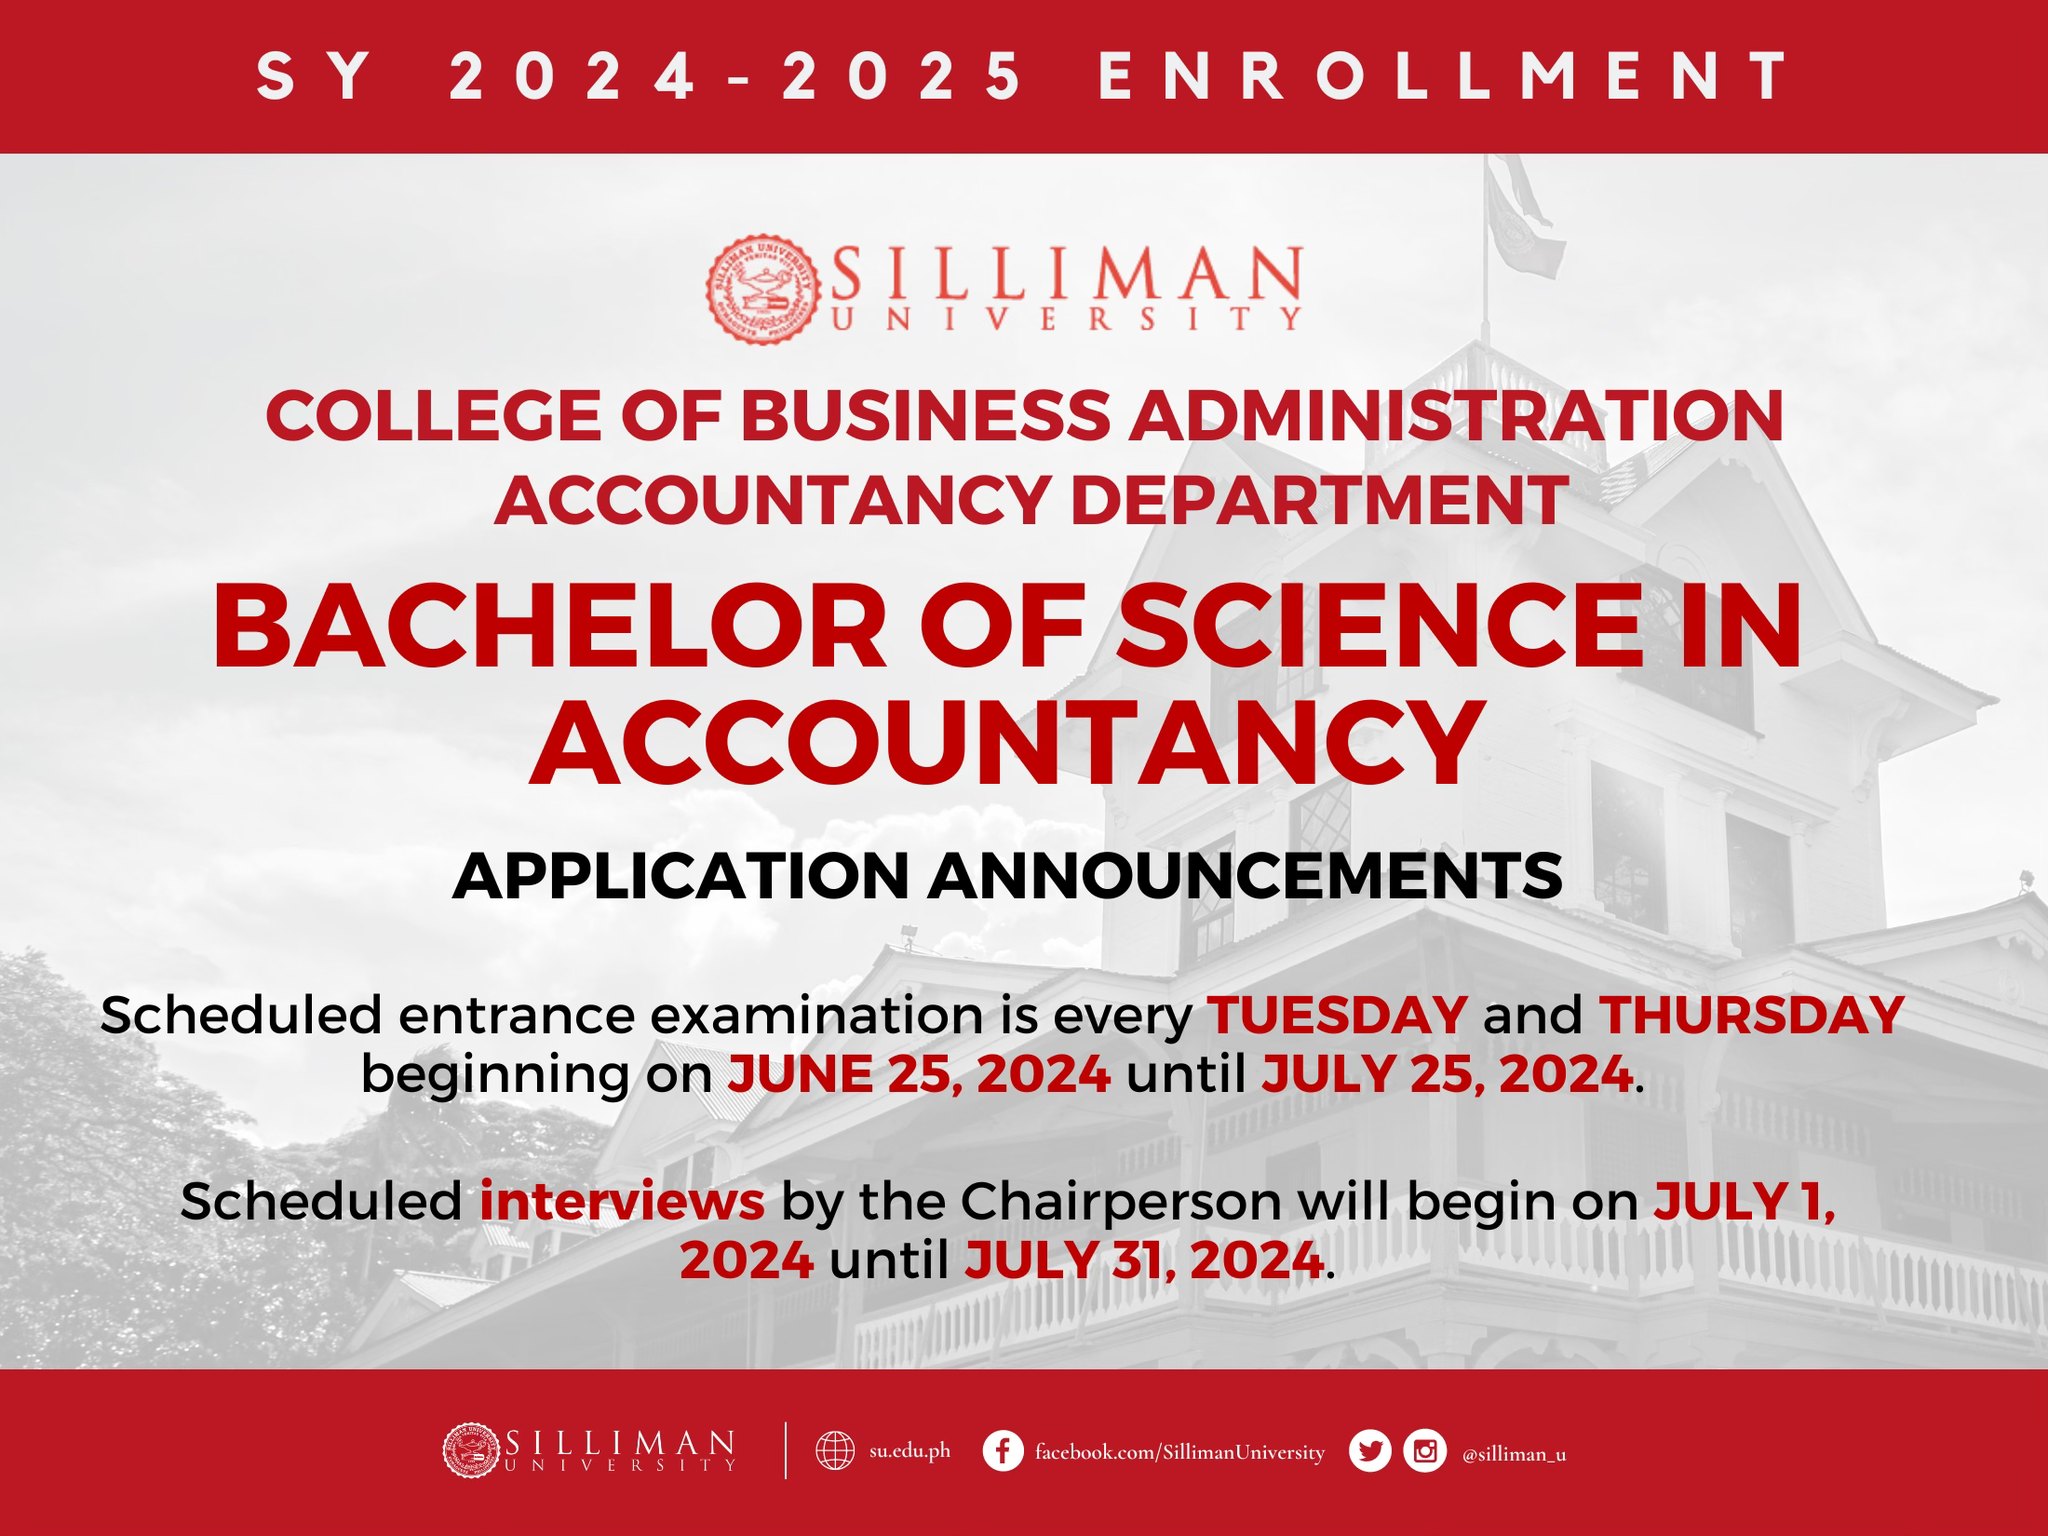 College of Business Administration – Accountancy Department is calling all interested first-year applicants to APPLY